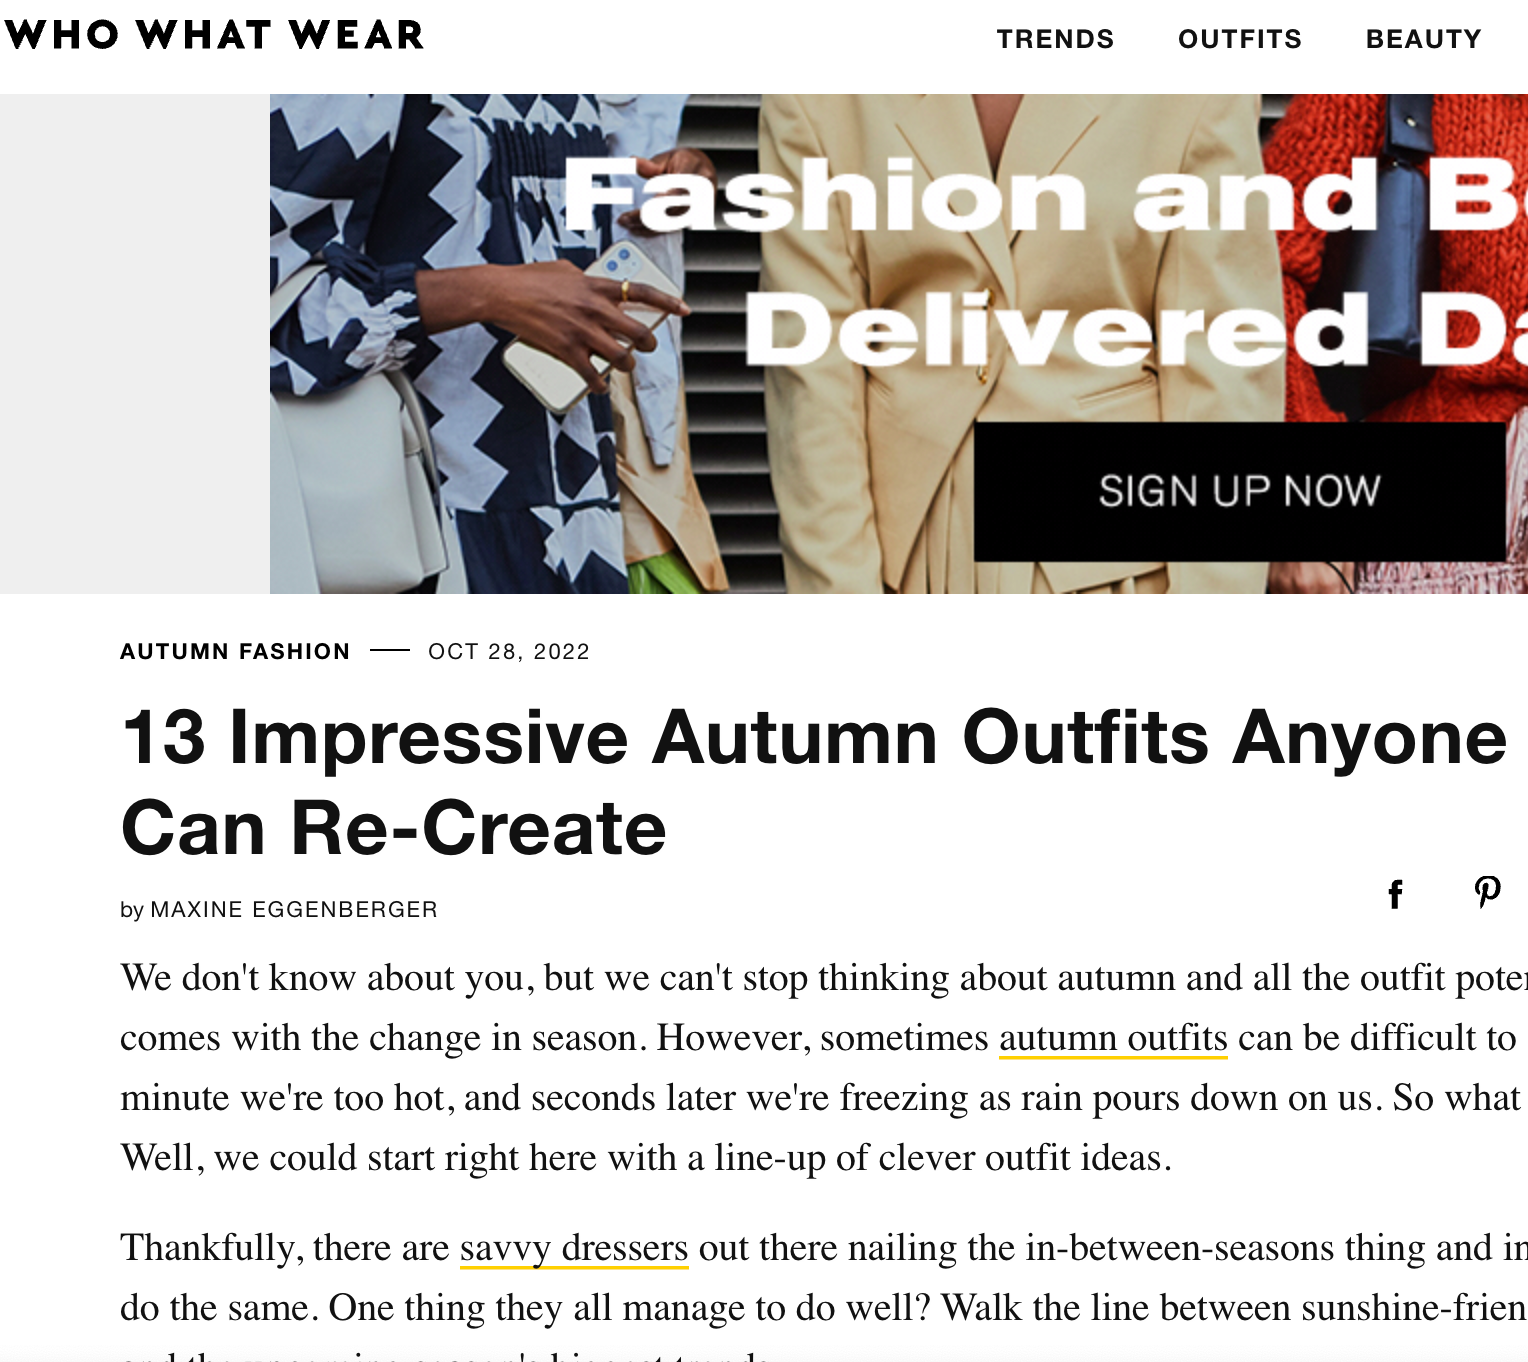 13 Impressive Autumn Outfits Anyone Can Re-Create